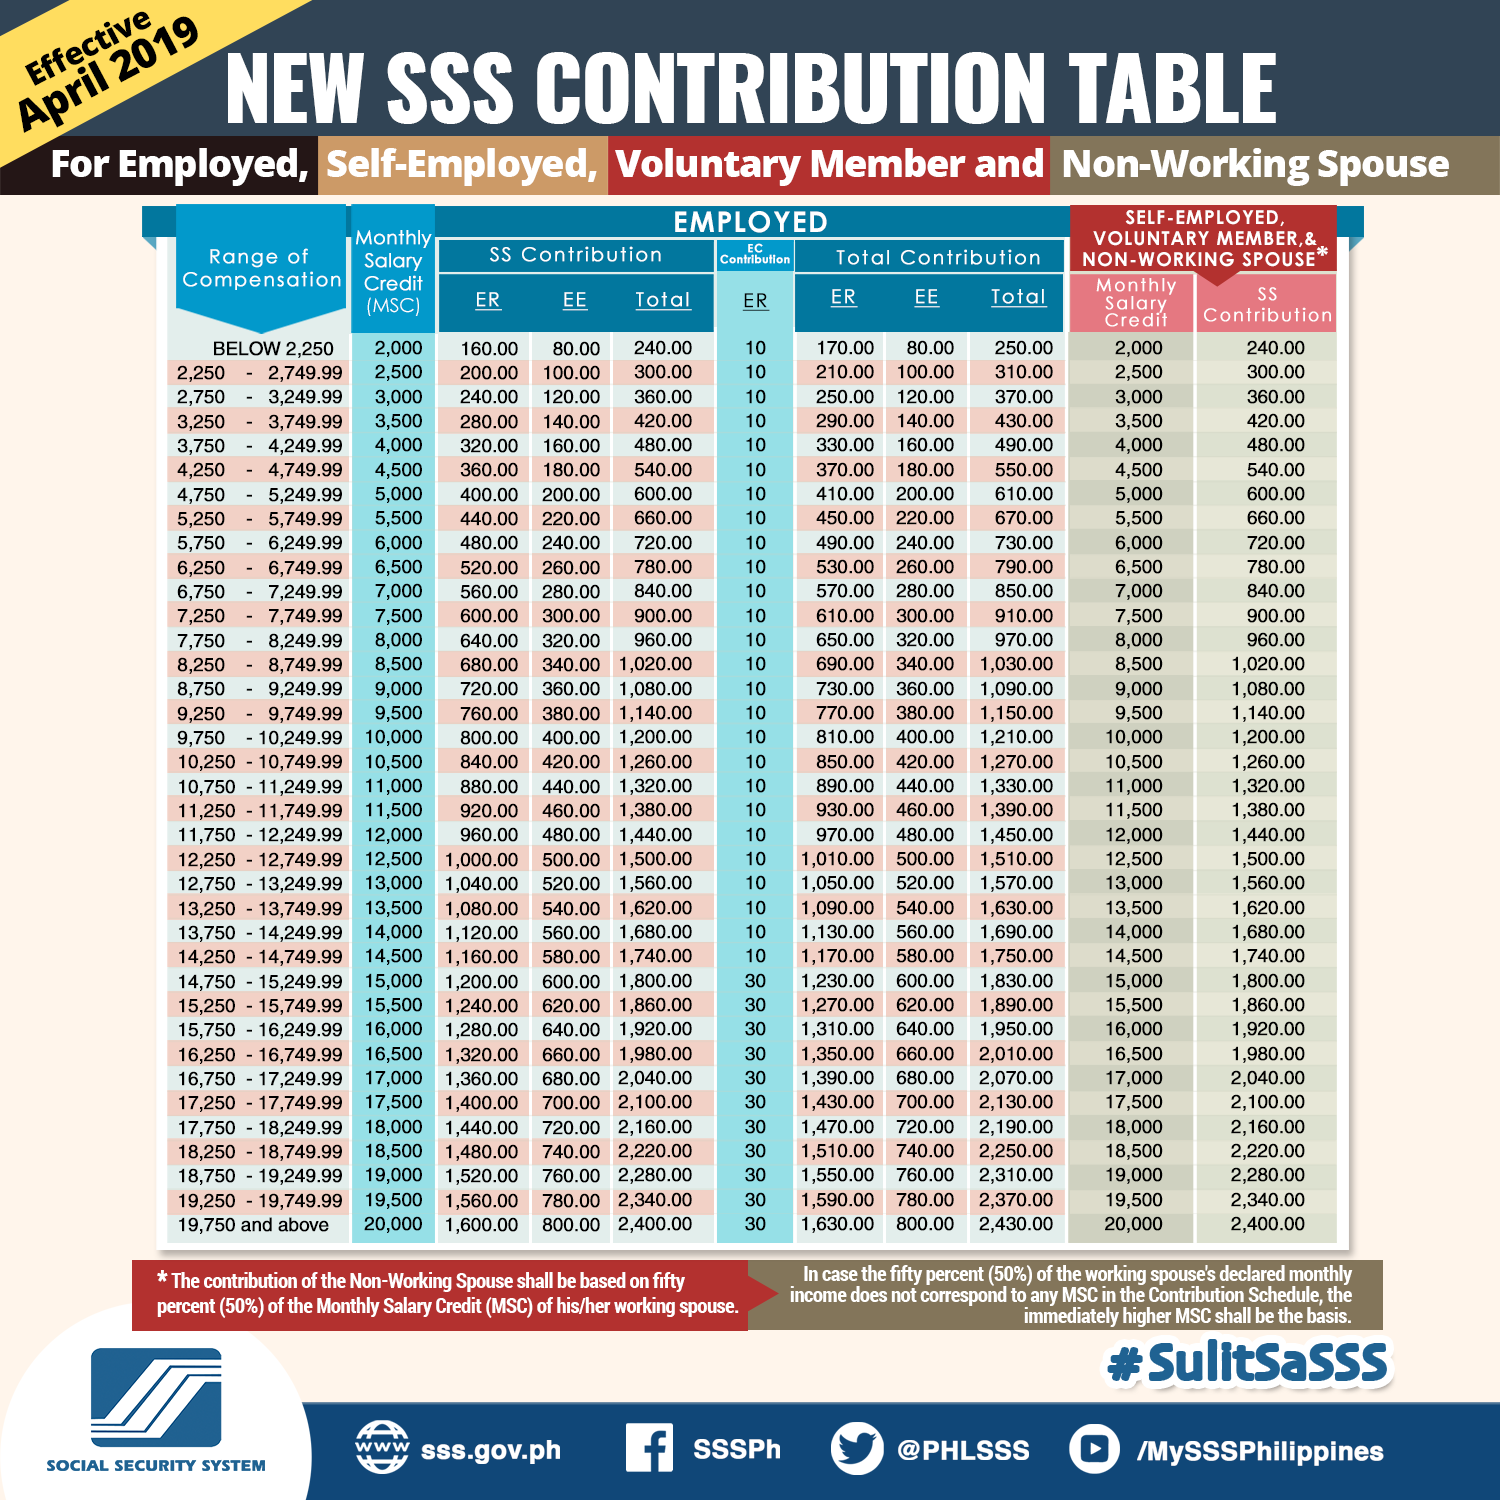 SSS Newly Updated Contribution Table for 2019